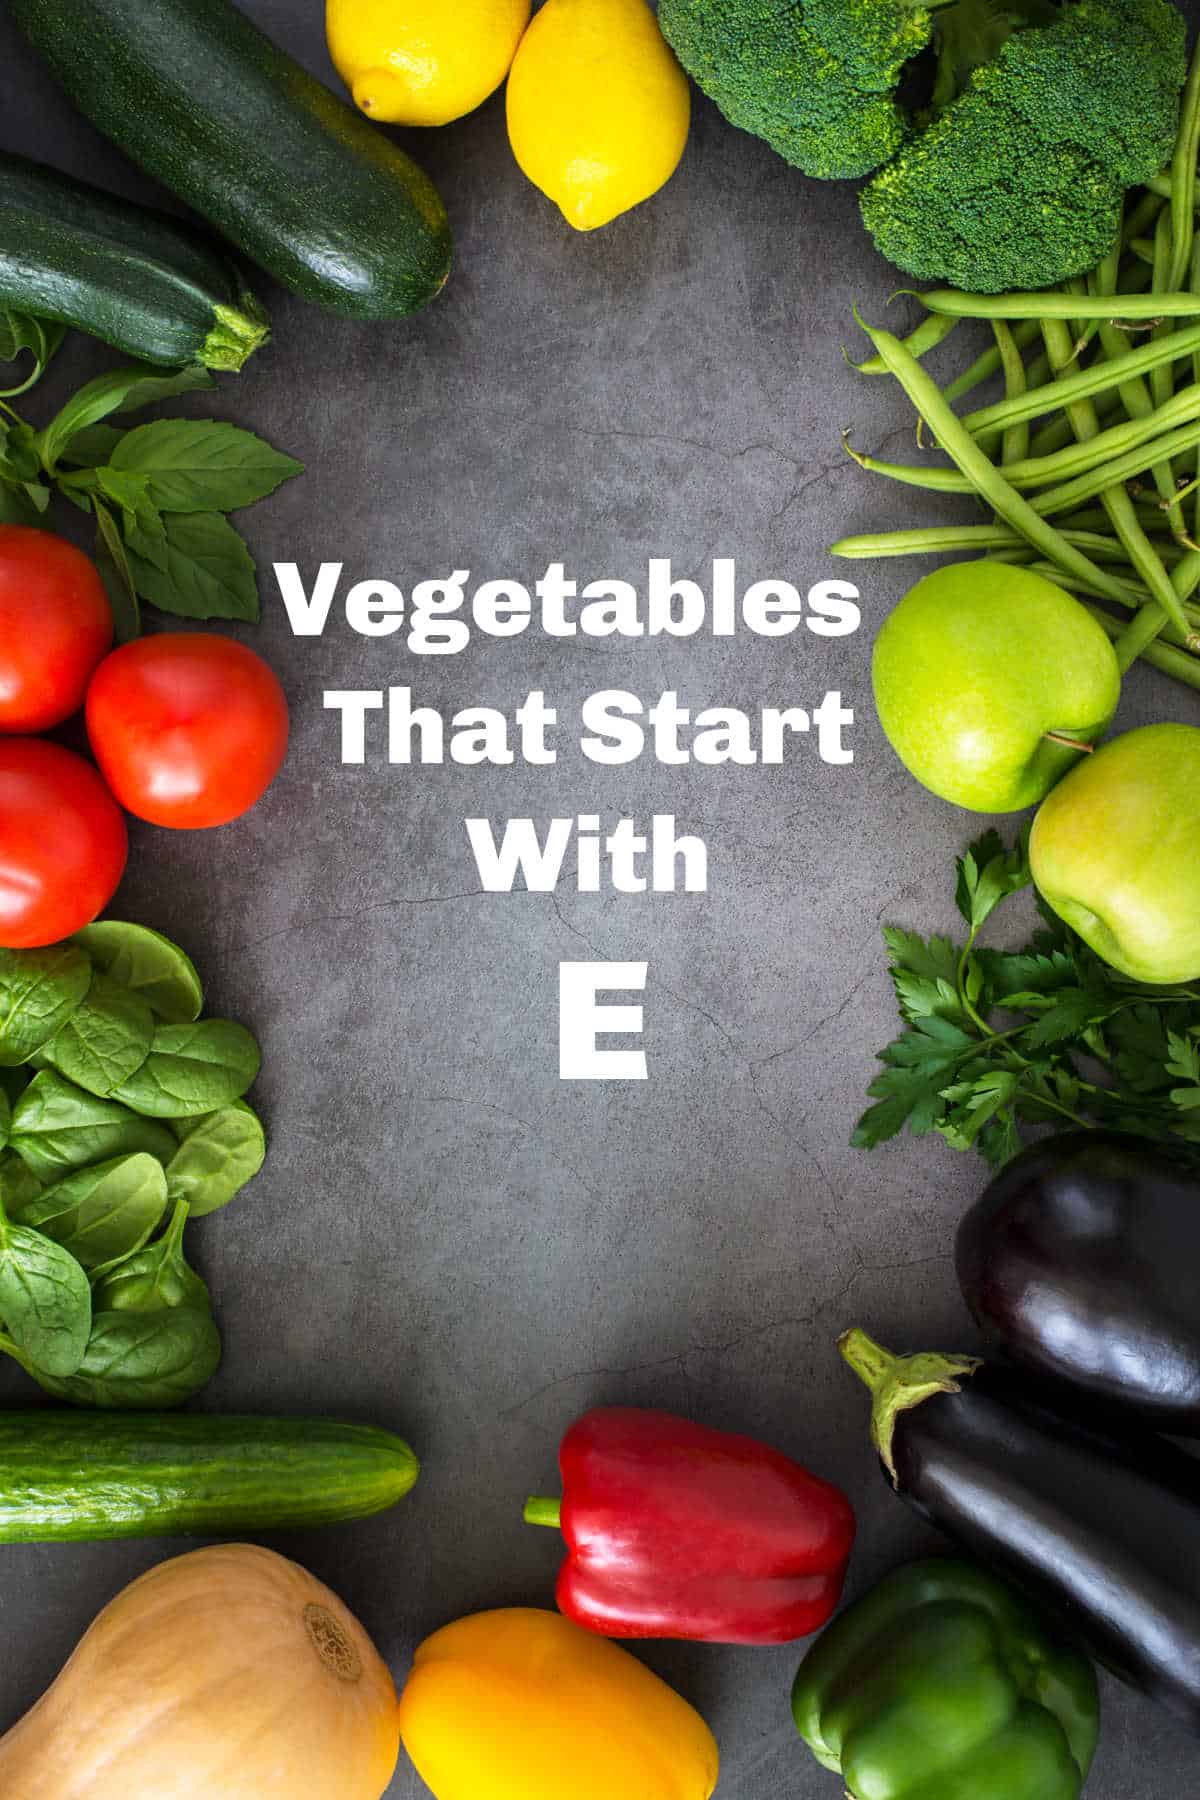 Vegetables that start with E.